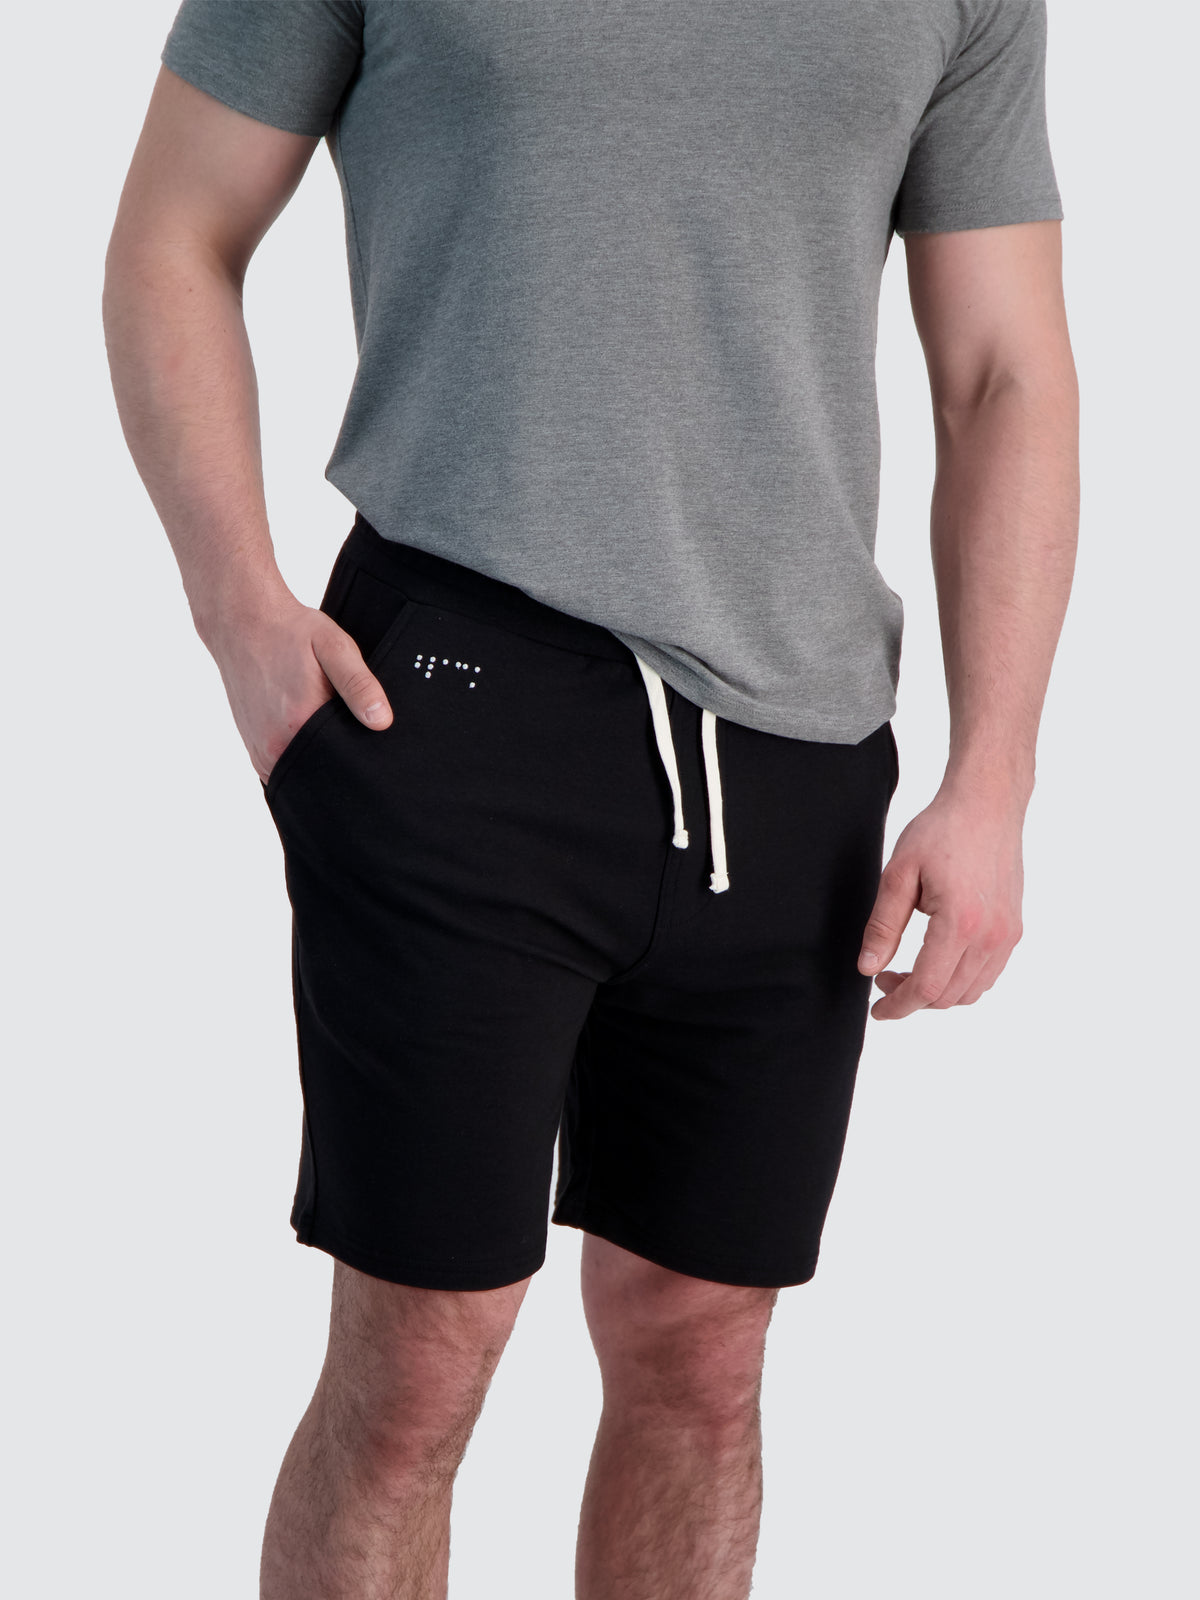 Two Blind Brothers - Mens Men's French Terry Lounge Shorts Black